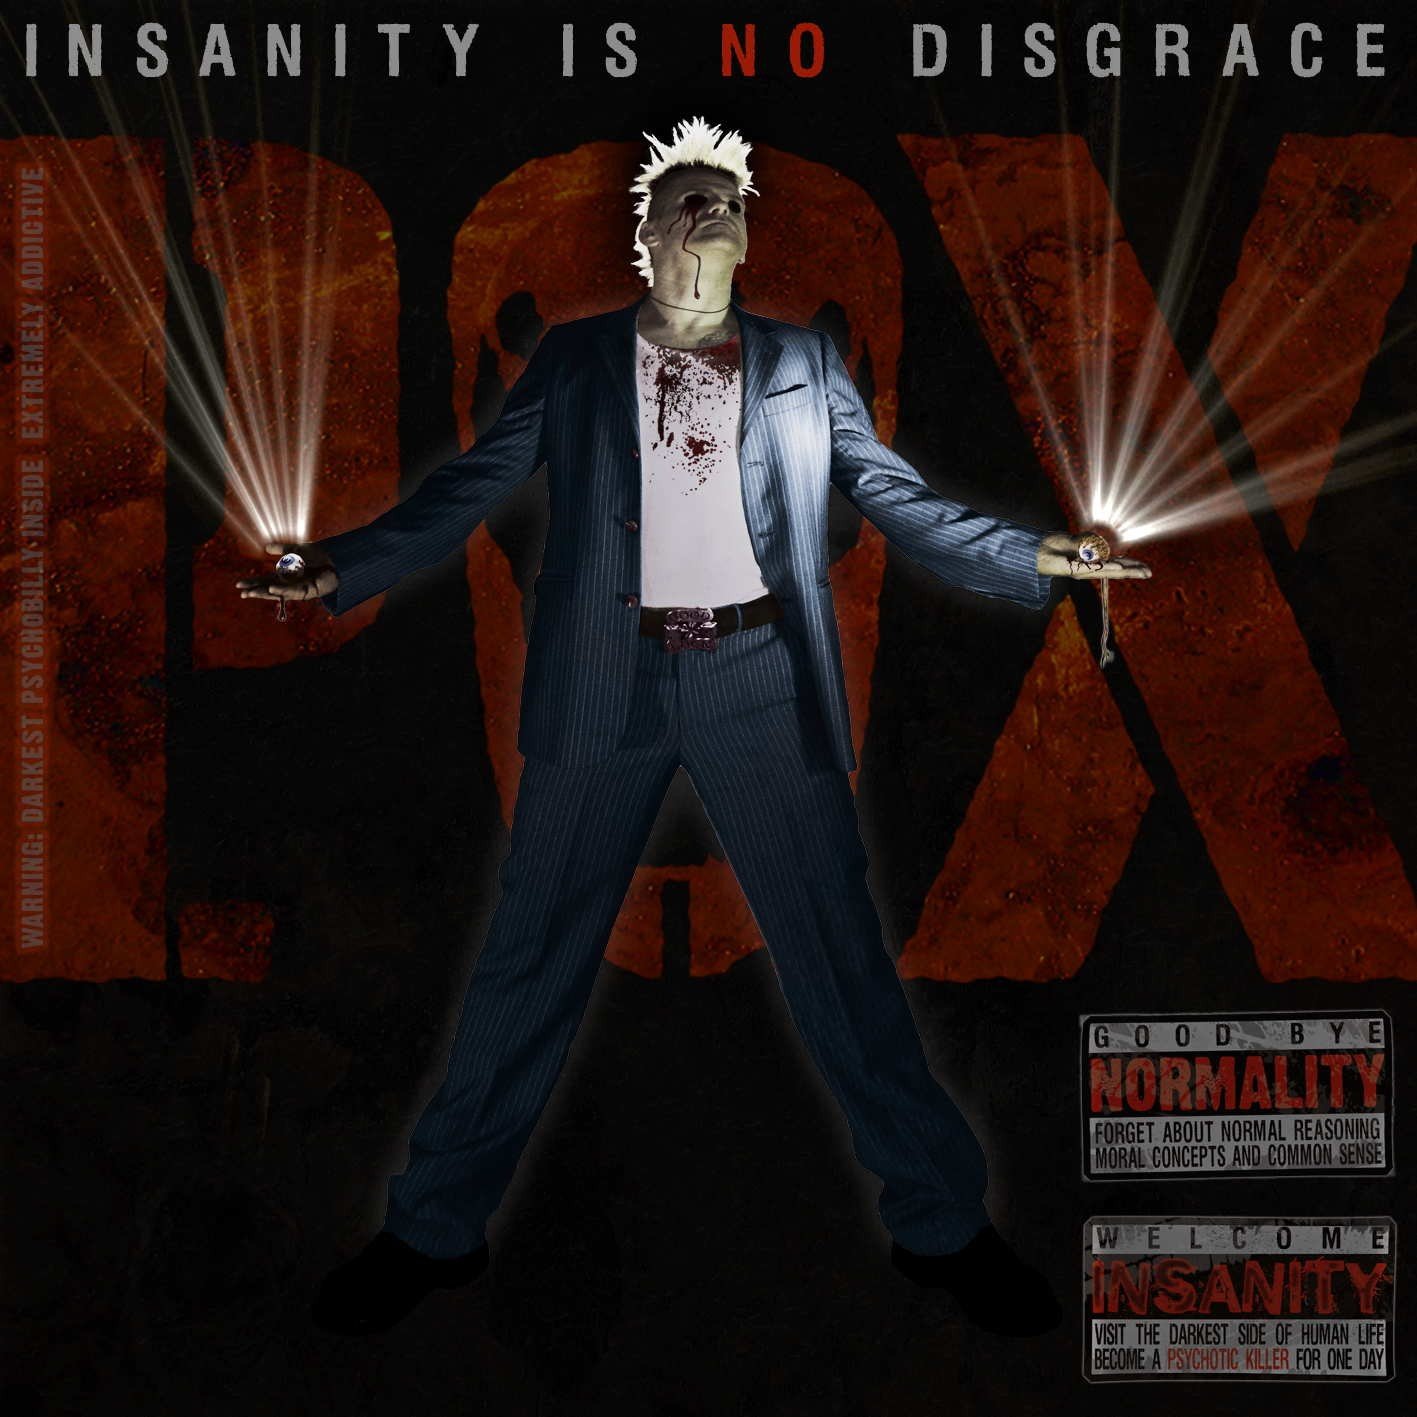 P.O.X. - Insanity is no disgrace